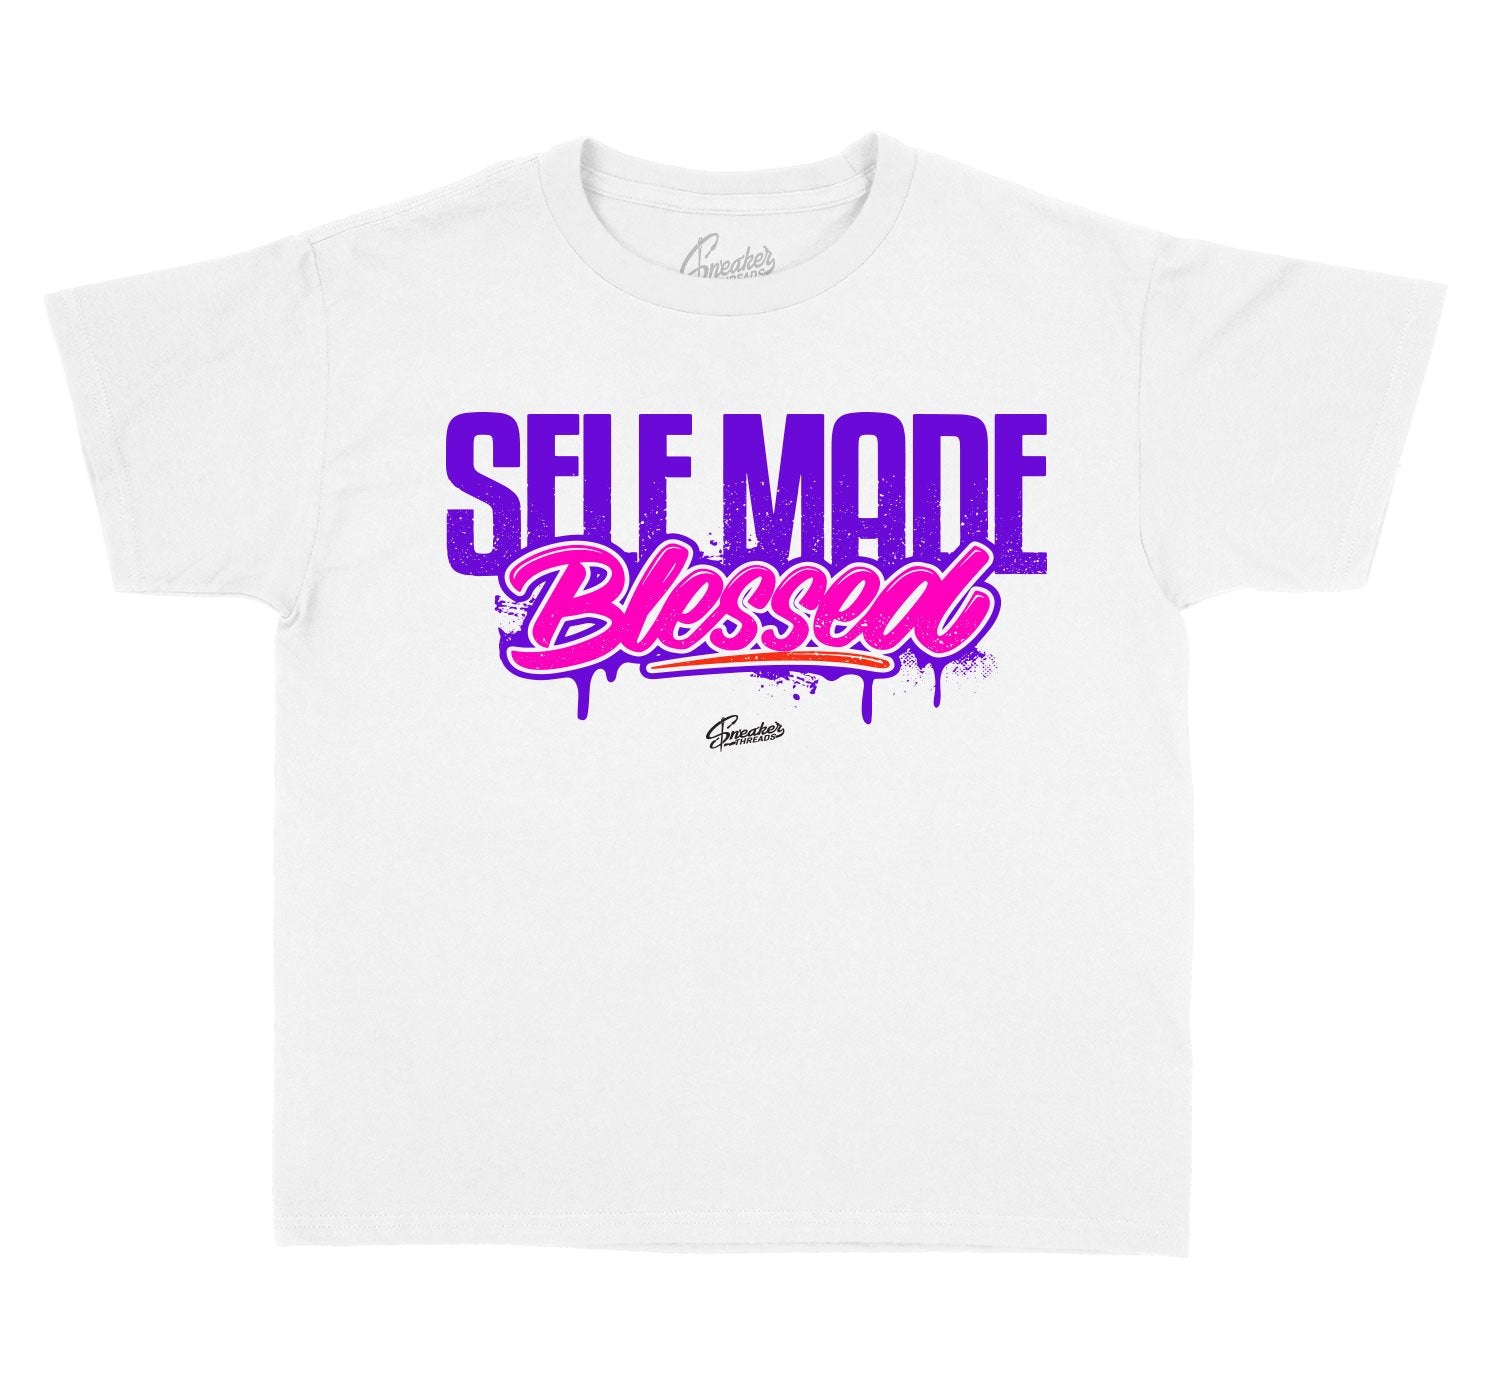 Kids tees made to match the barely grape 3 Jordan sneakers